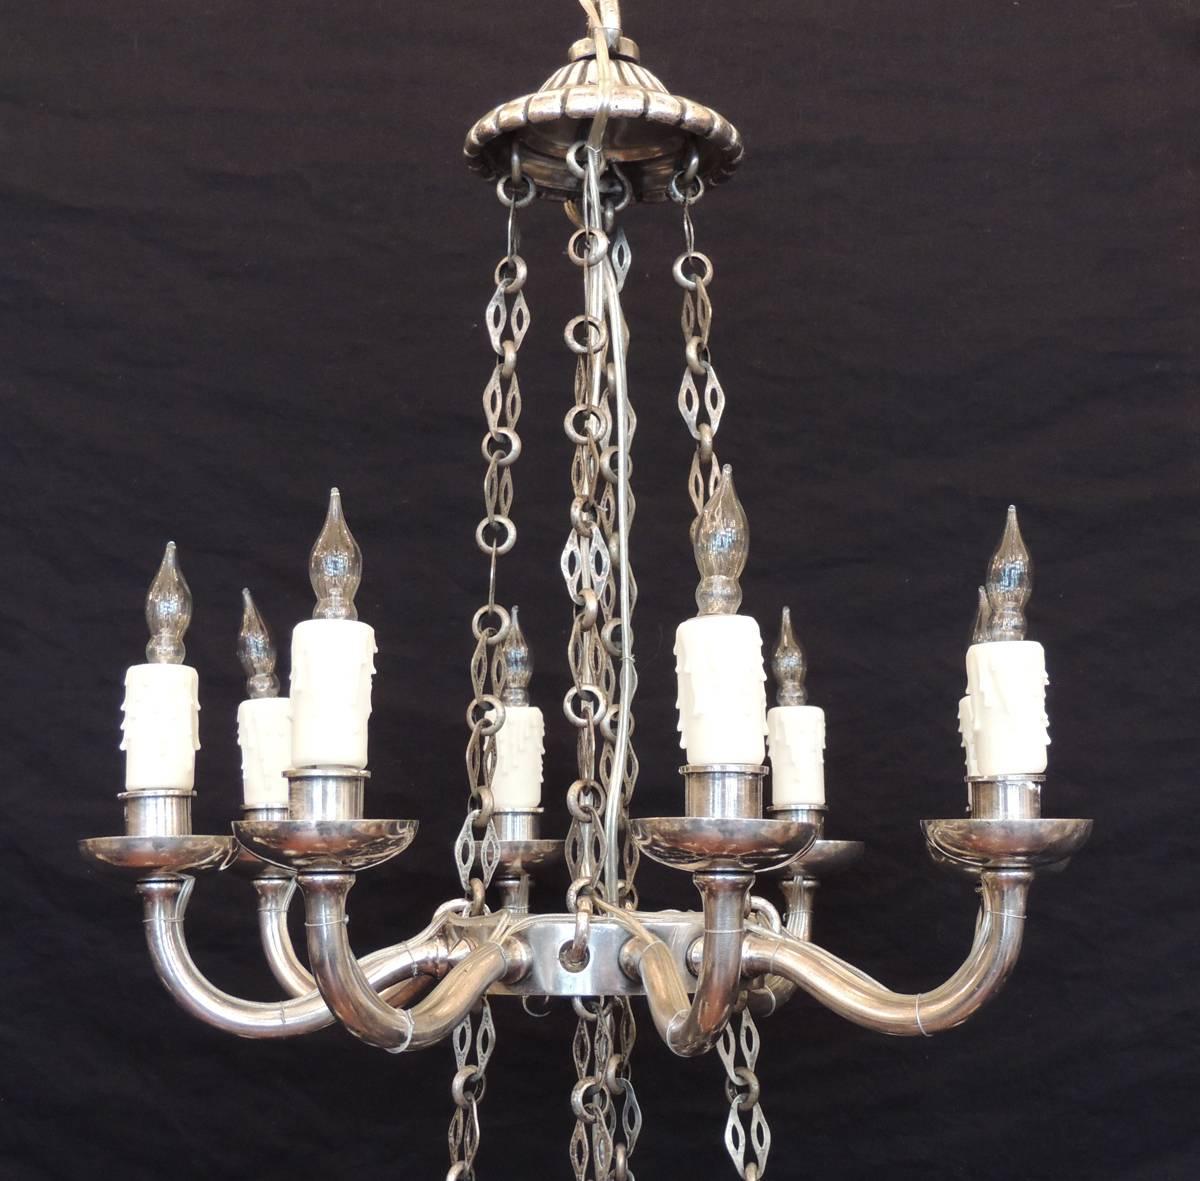 This chandelier was made in Italy in the early half of the 19th century, circa 1810, and has two graduated tiers with sixteen lights in total. The two sections are supported by four silver plated bronze chains that connect to a top canopy. This